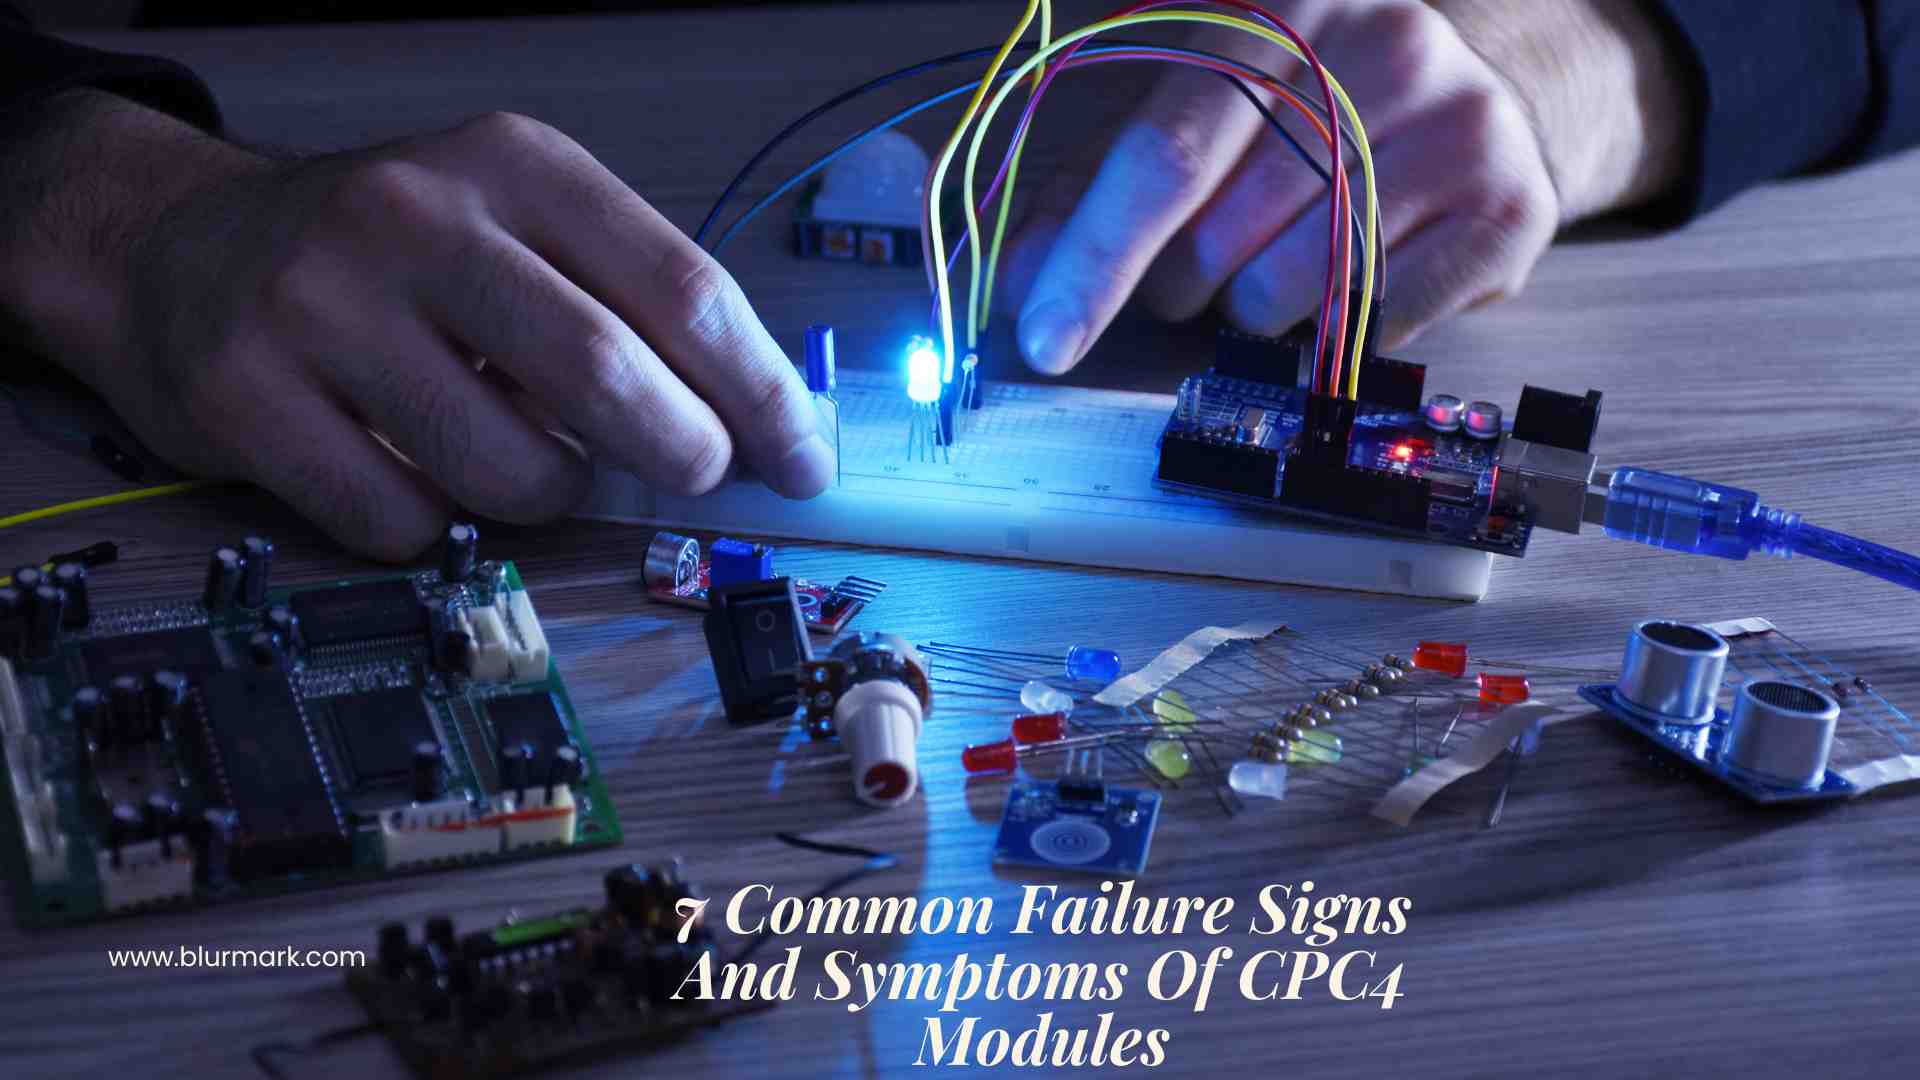 Common Failure Signs And Symptoms Of CPC4 Modules